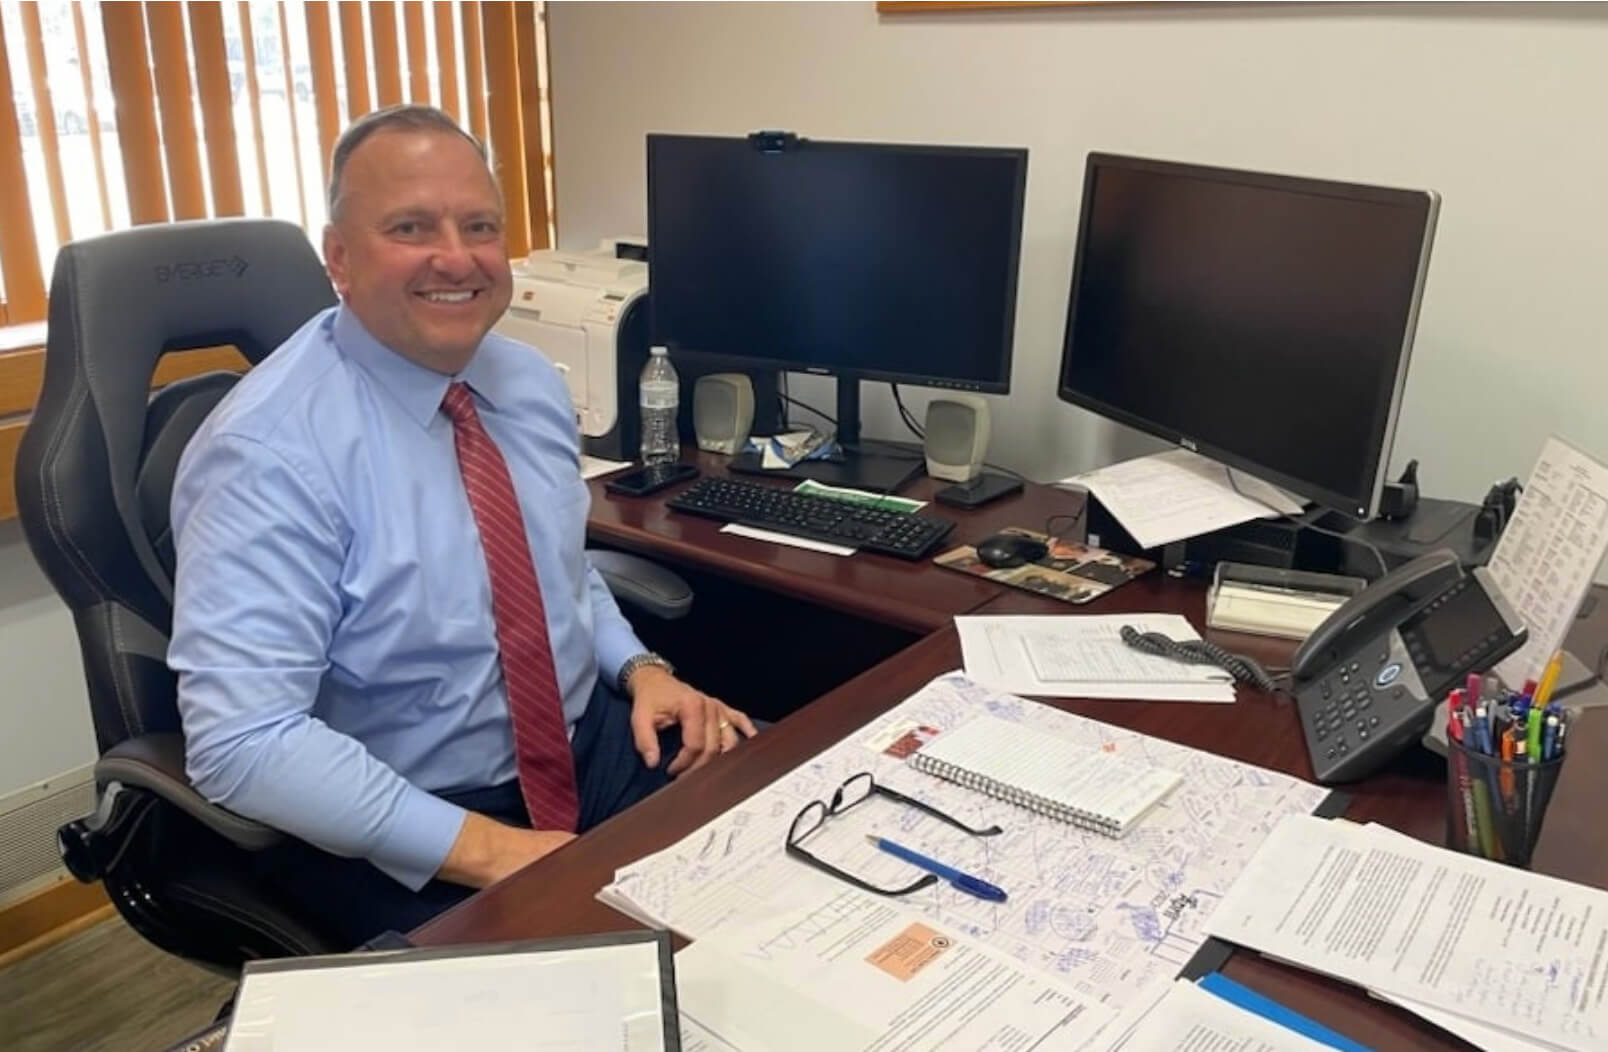 [CREDIT: Rob Borkowski] Coventry Town Manager Daniel Parrillo, in his office at Coventry Town Hall, 1670 Flat River Road, Coventry, RI.